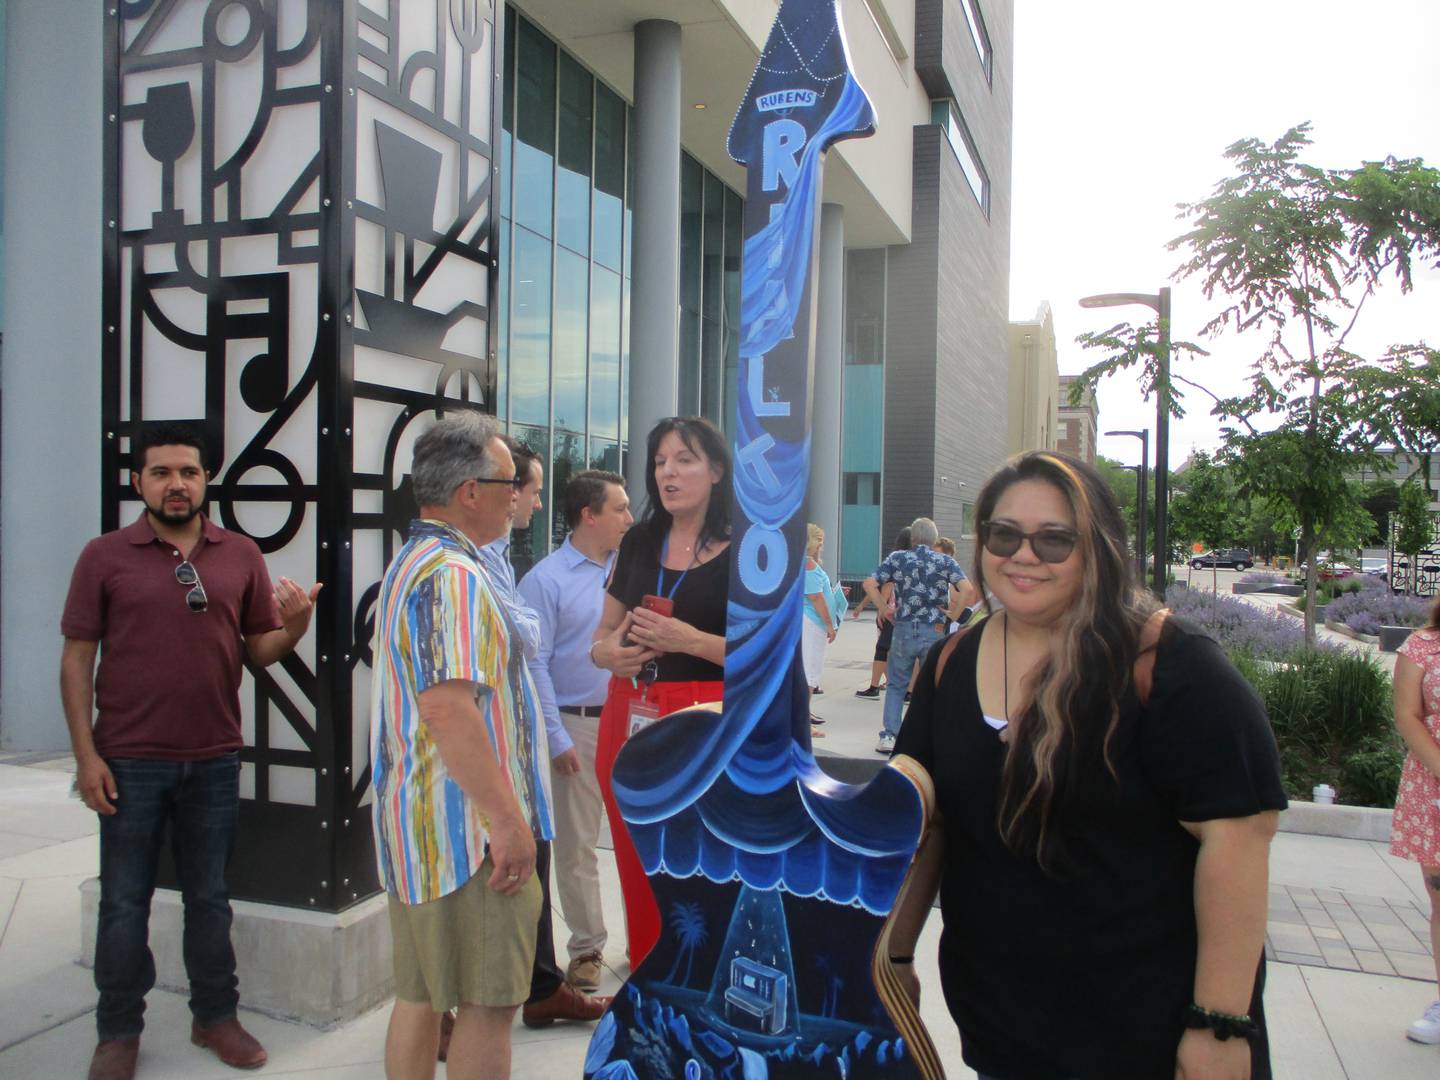 Sarah Comoda of Romeoville on Thursday stands with the guitar, "Rockin' the Paradise," that she painted for the Joliet "Ready to Rock" street art project. June 1, 2023.